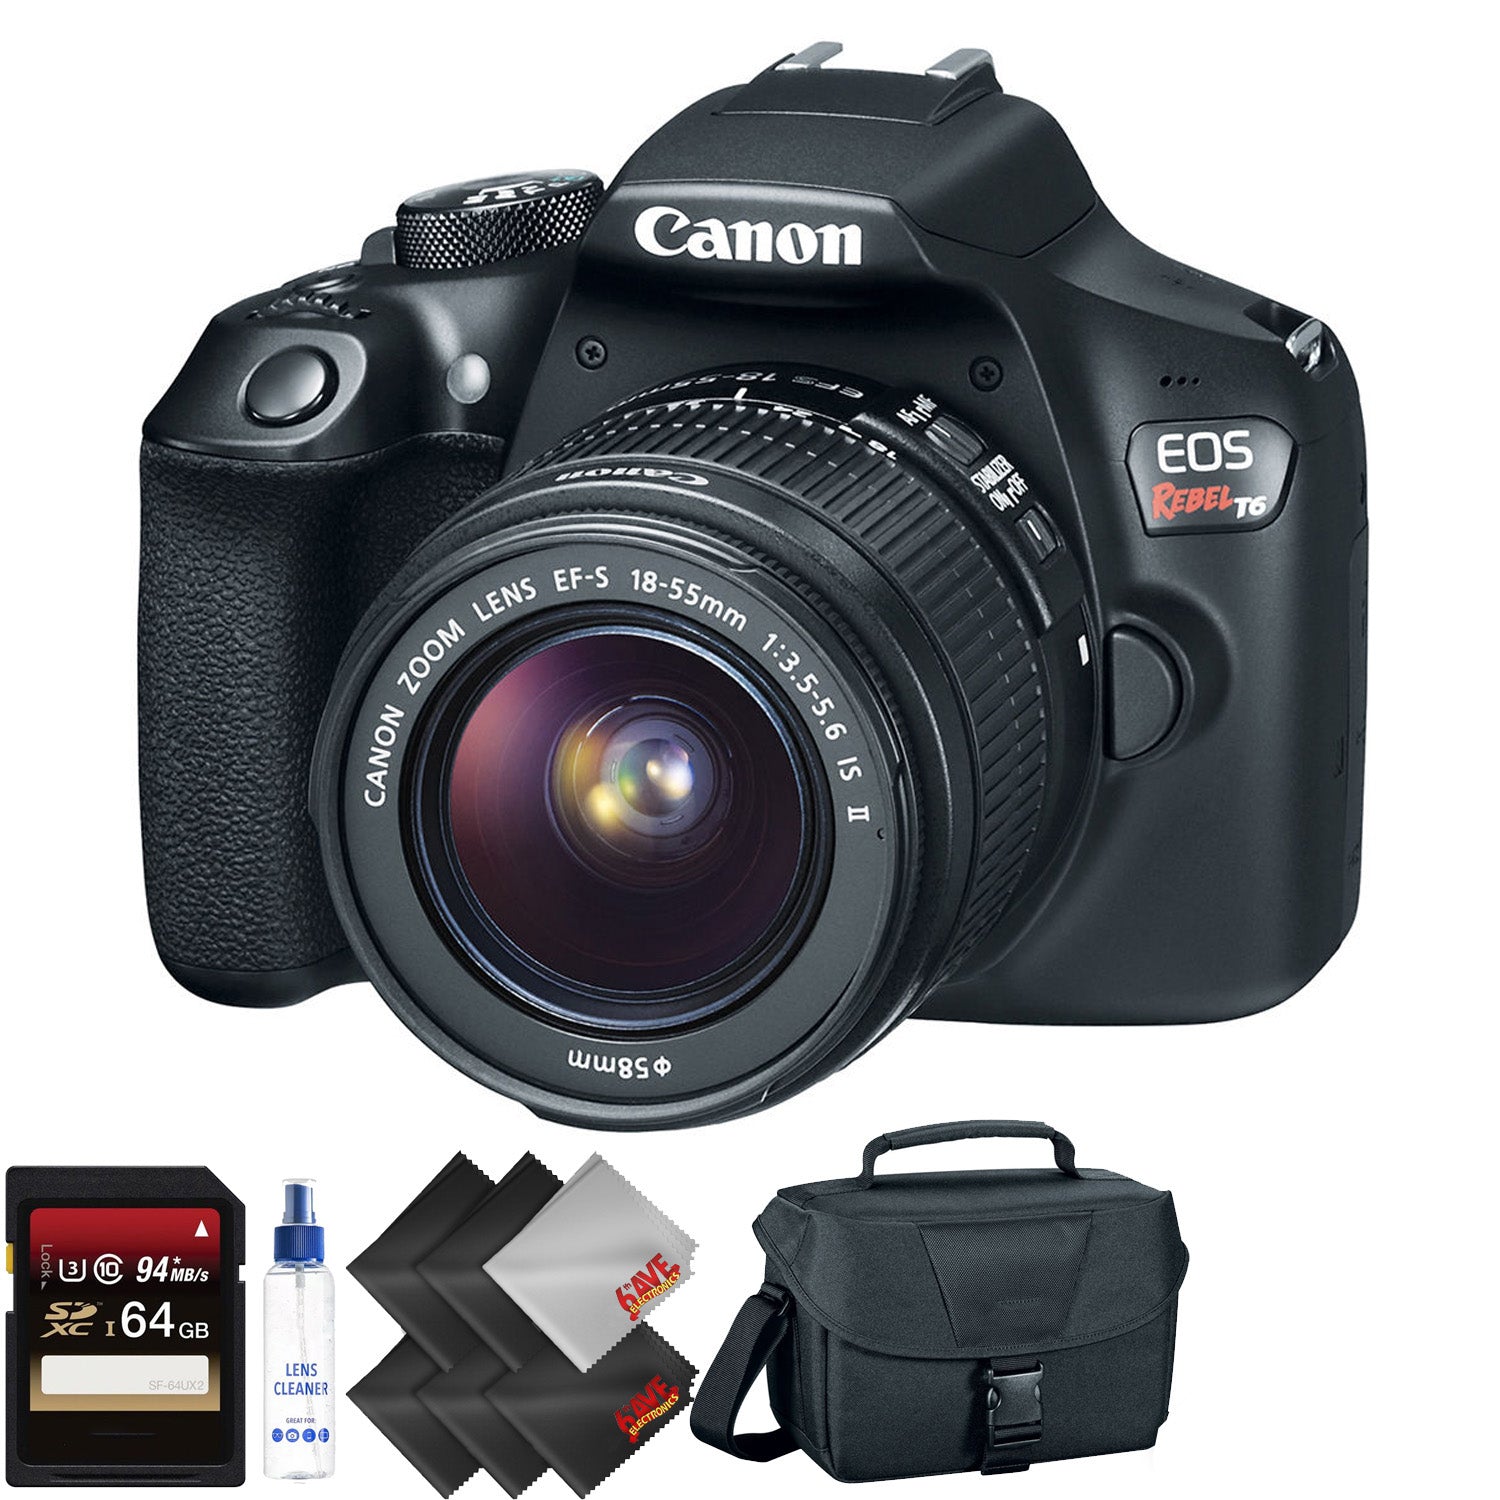 Canon EOS Rebel T6 DSLR Camera with 18-55mm Lens + 64GB Memory Card + 1 Year Warranty Bundle